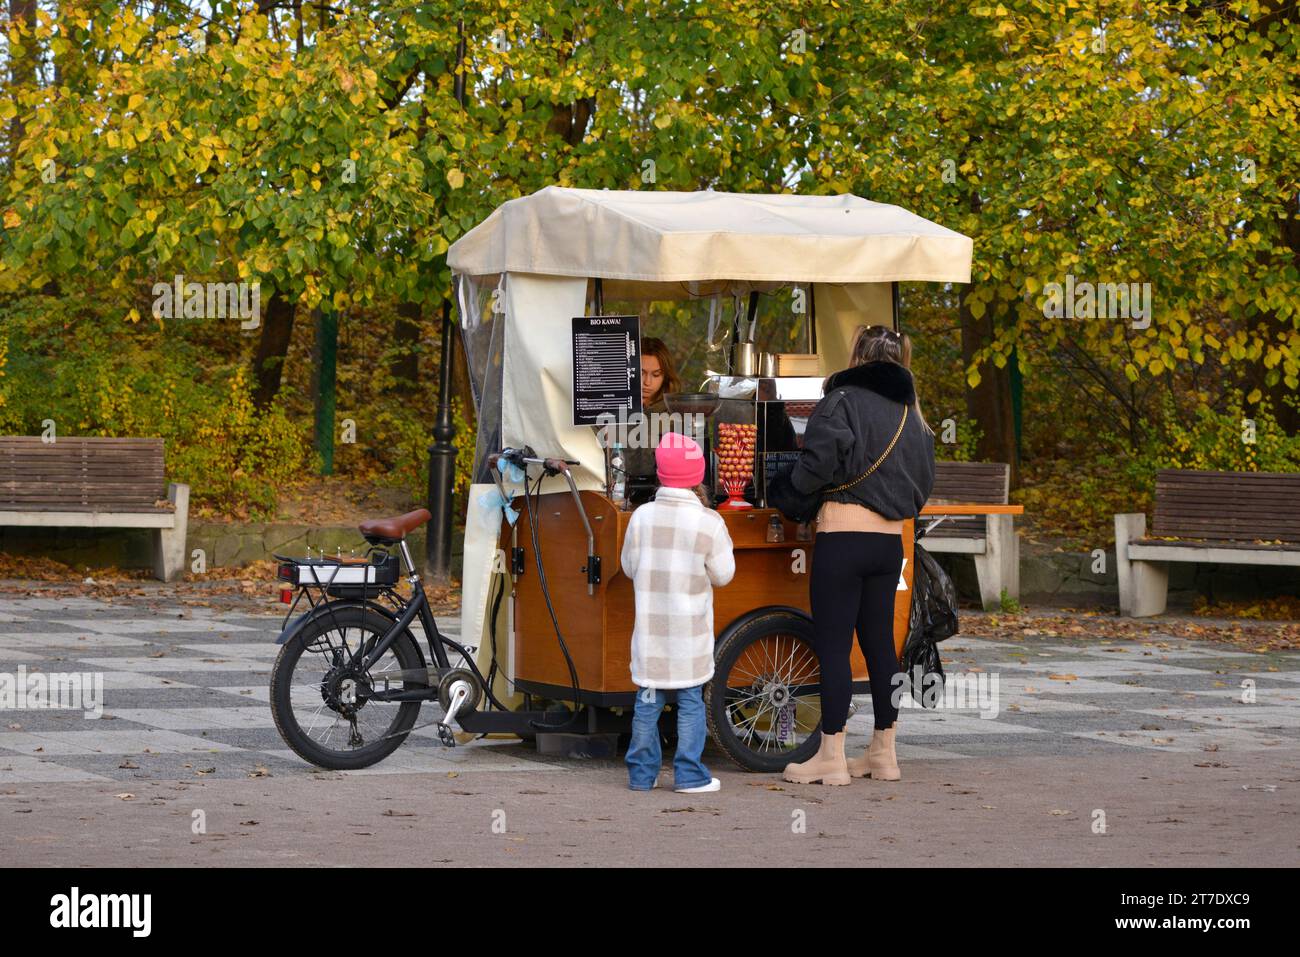 Mobile stall selling coffee and sweets to a family at the Jelitkowo Beach park in Gdansk, Poland, Europe, EU Stock Photo